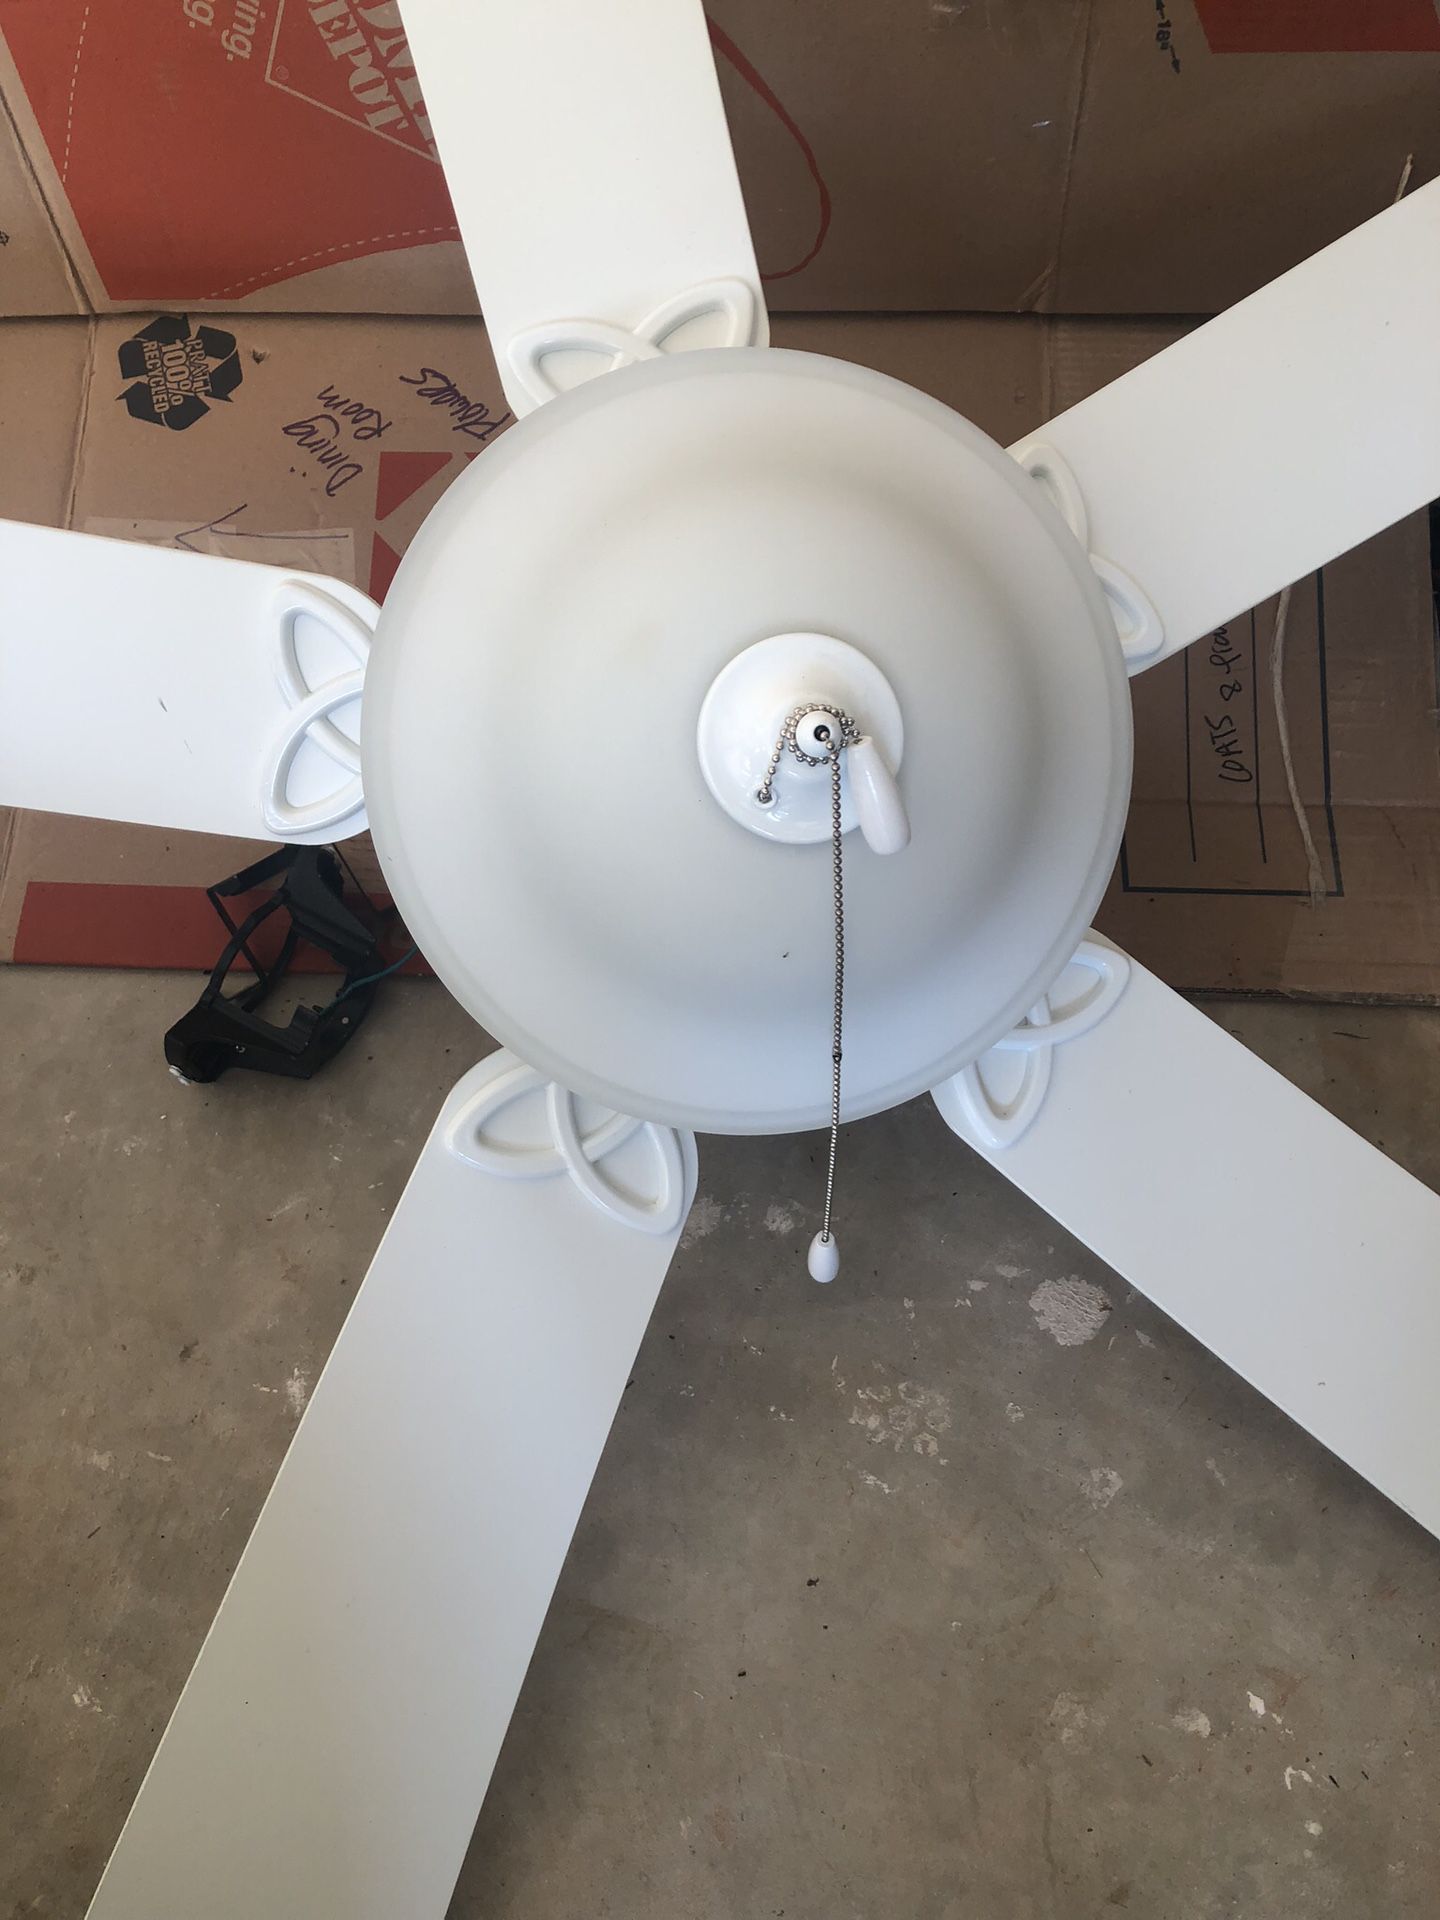 brand new white ceiling fan w light. never used! great deal! cash only!